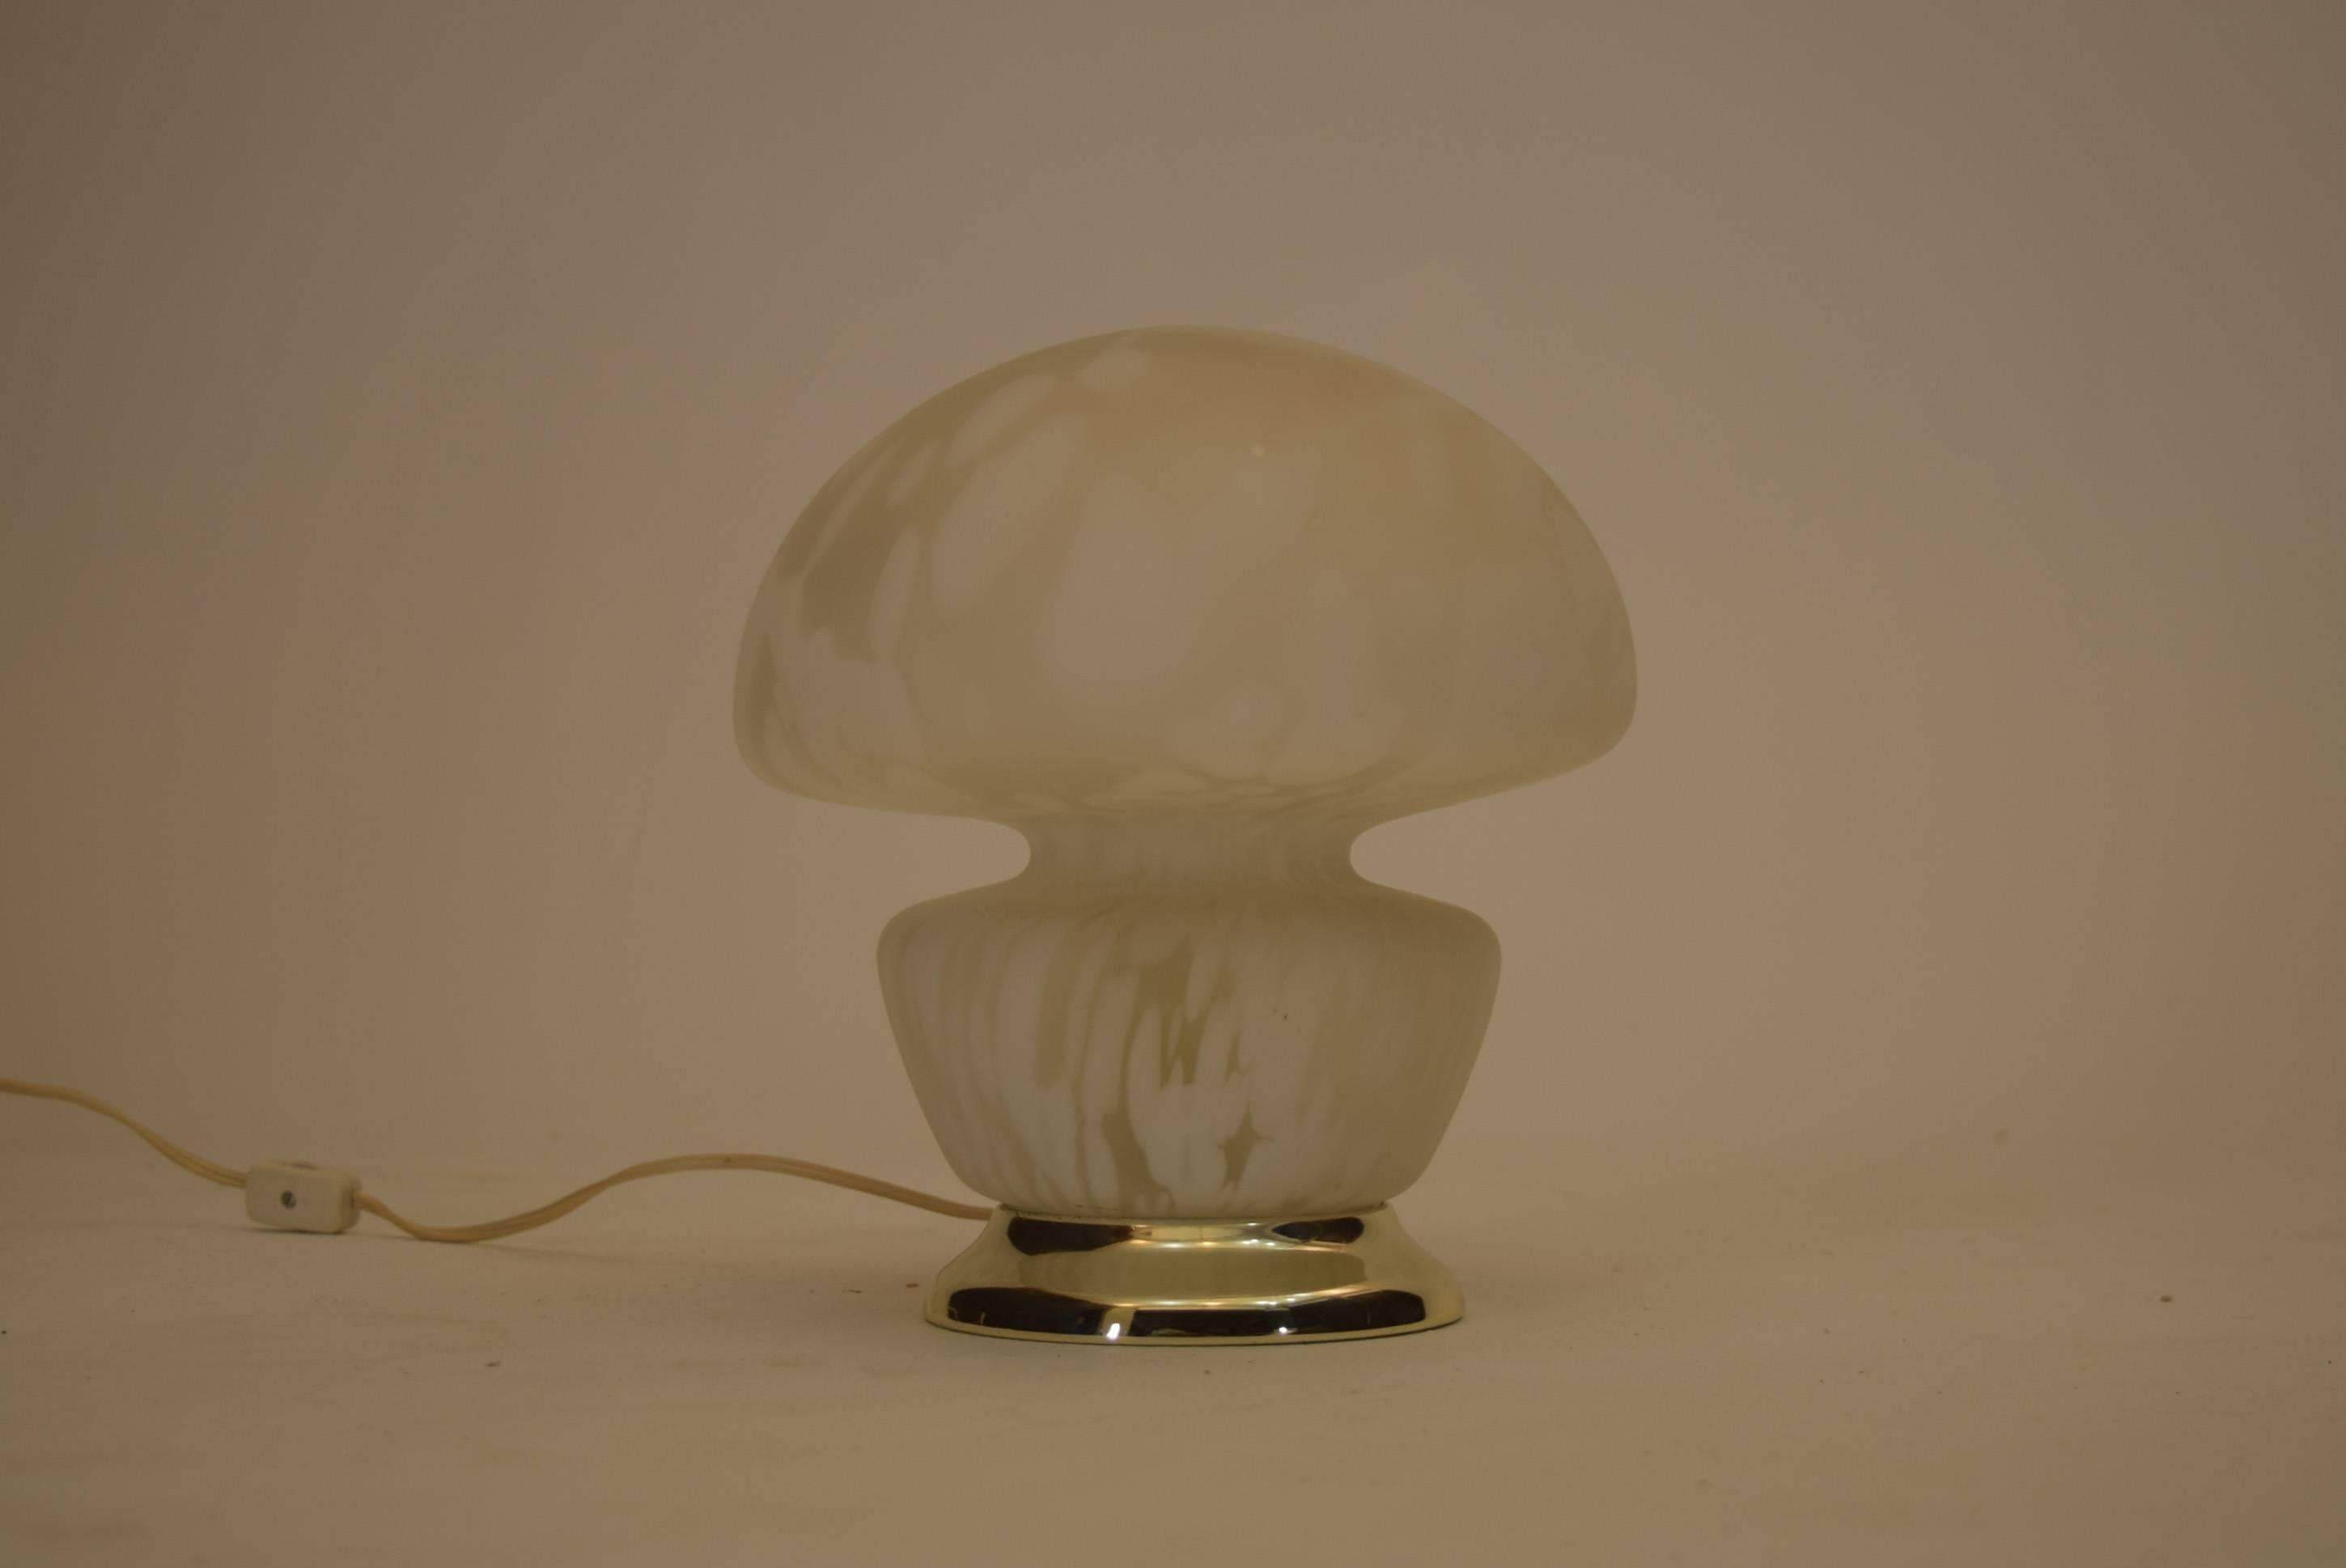 
A lovely spotted mushroom lamp hand blown from Italy. The entire glass section is a singular piece of glass blown by the artist, possibly Vetri production, but unsigned.

The lamp shade clips off the brass base and bulbs of various wattages cash